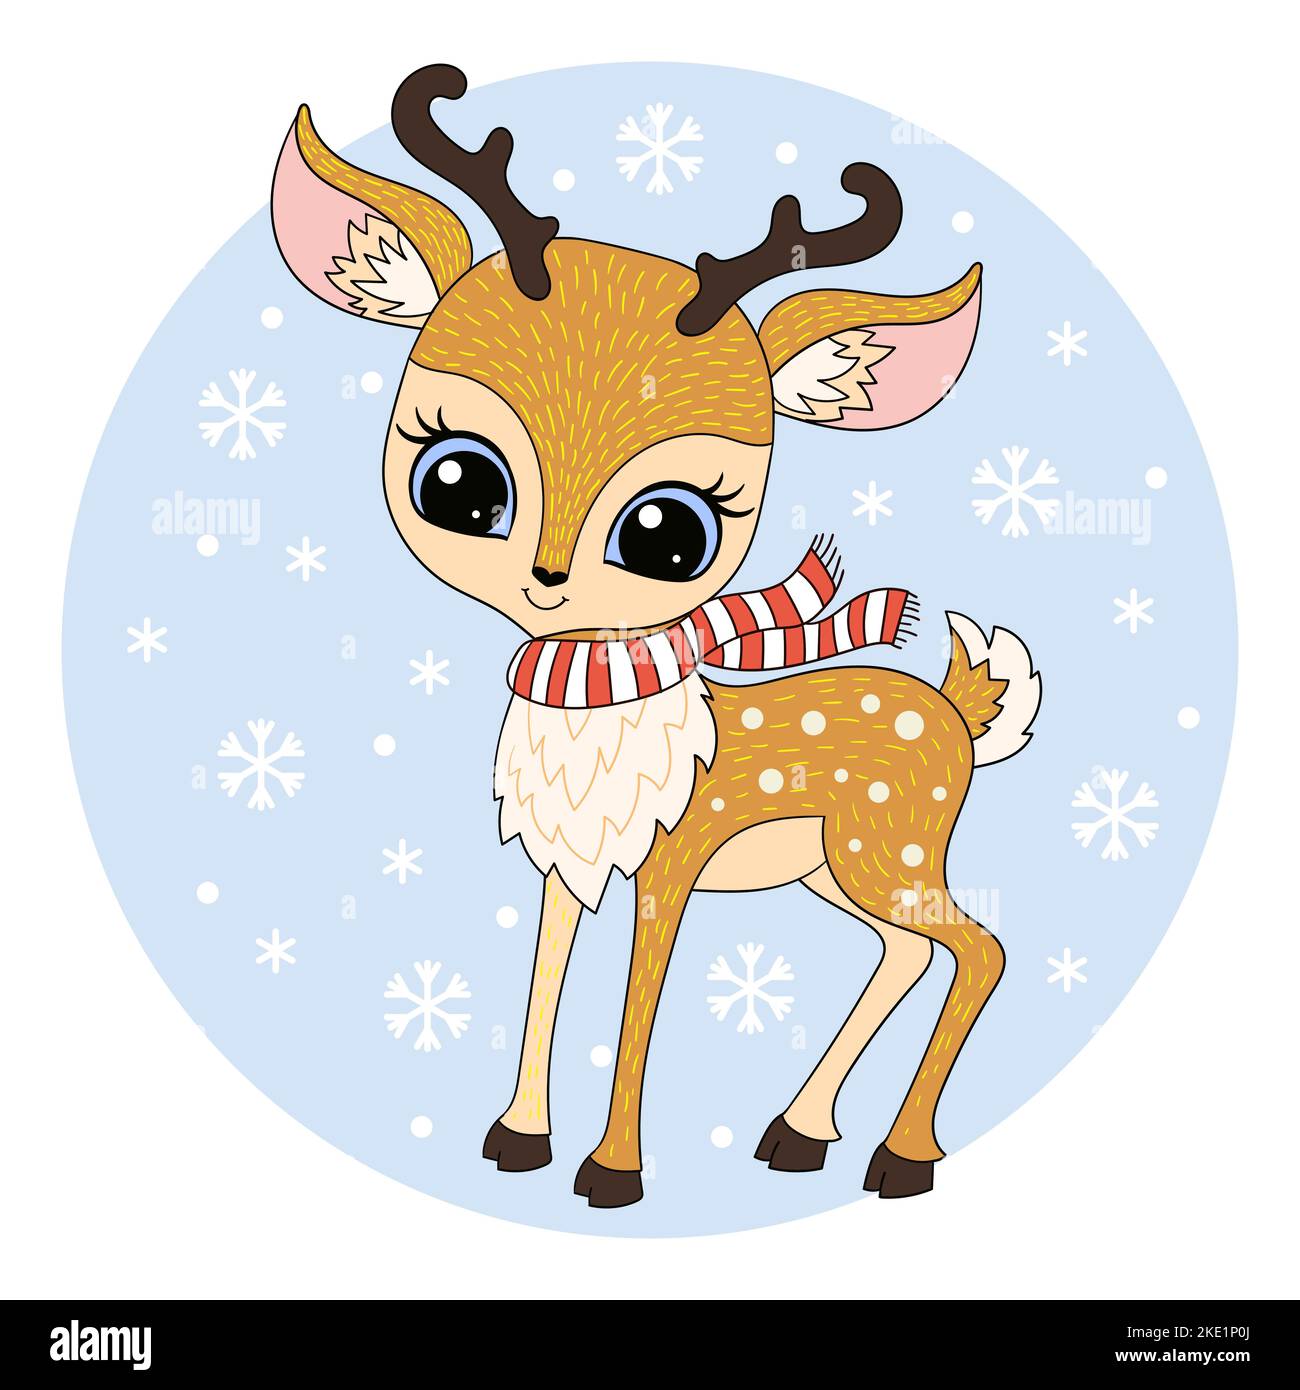 Cute little reindeer wearing a winter scarf. Christmas and winter theme. For children's design of prints, posters, cards and so on. Vector illustratio Stock Vector